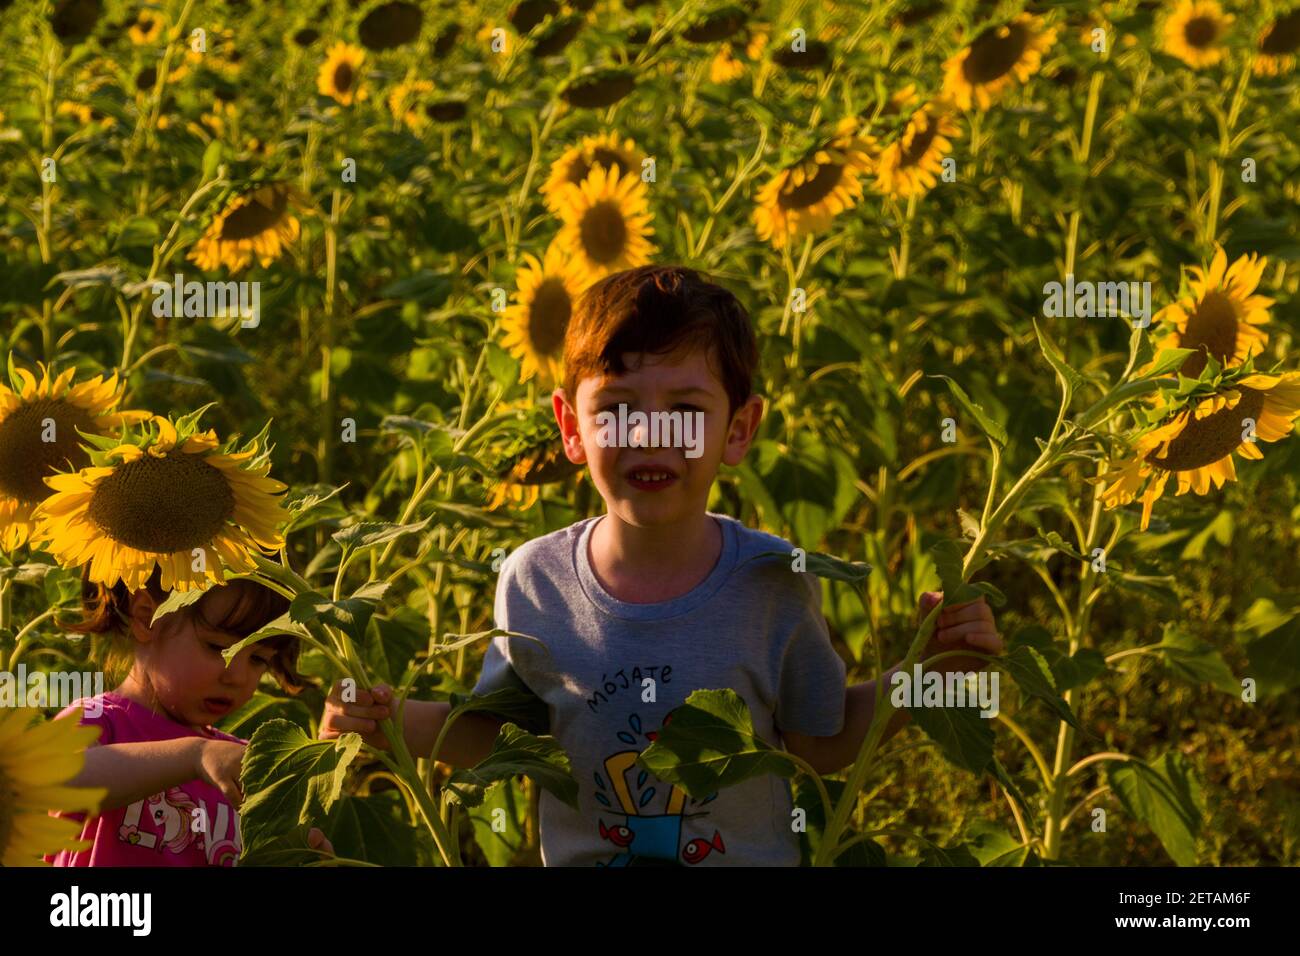 A cute boy and a baby girl playing in a field of sunflowers in the sunset Stock Photo